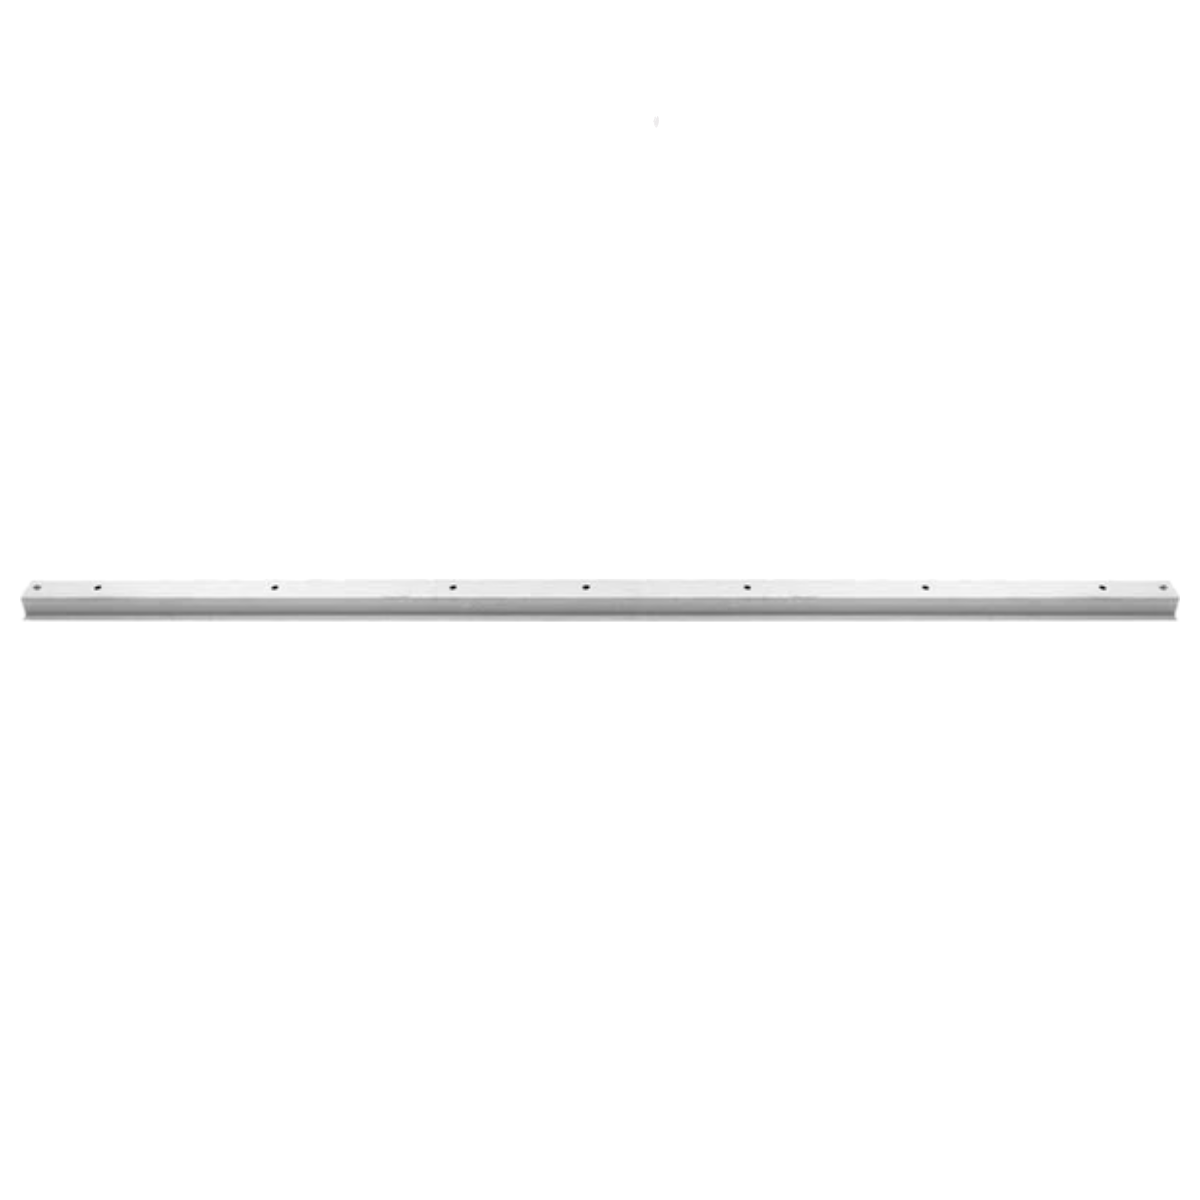 BROTHERS Truck Bed Angle Strip A0275-67